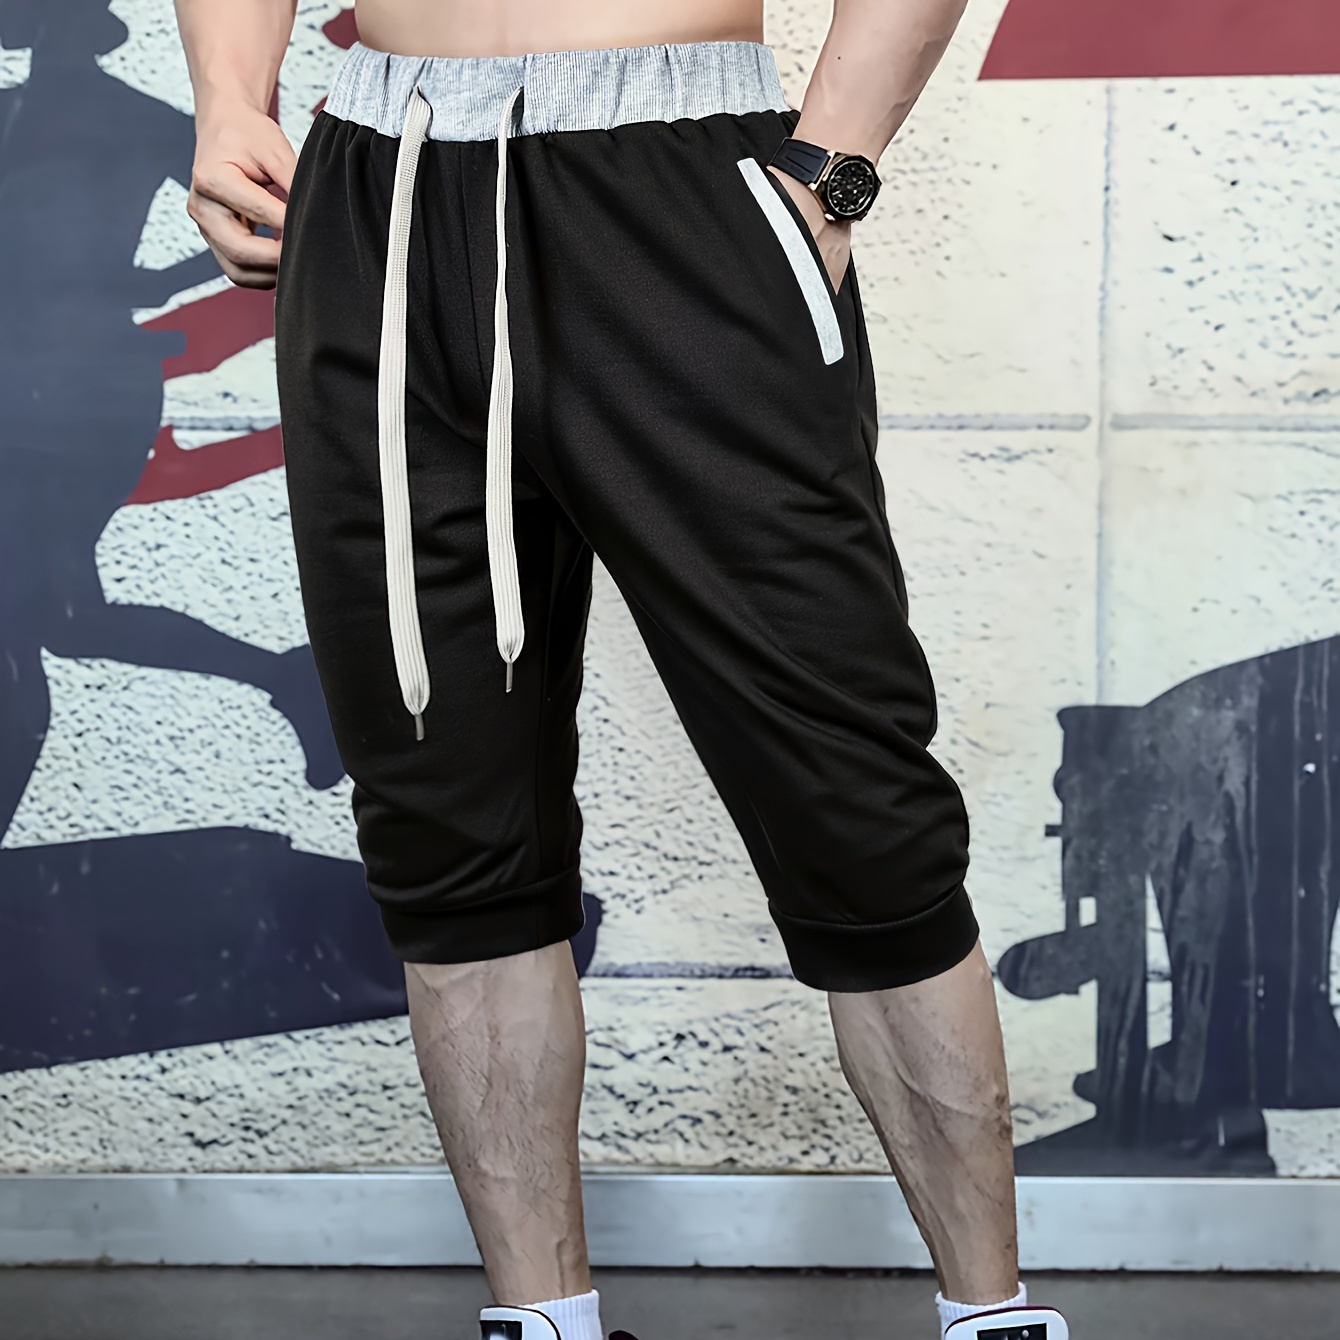 

Men's Contrast Color Capri Shorts With Drawstring And Pockets, Casual And Chic Joggers For Summer Gym And Outdoors Sports Wear